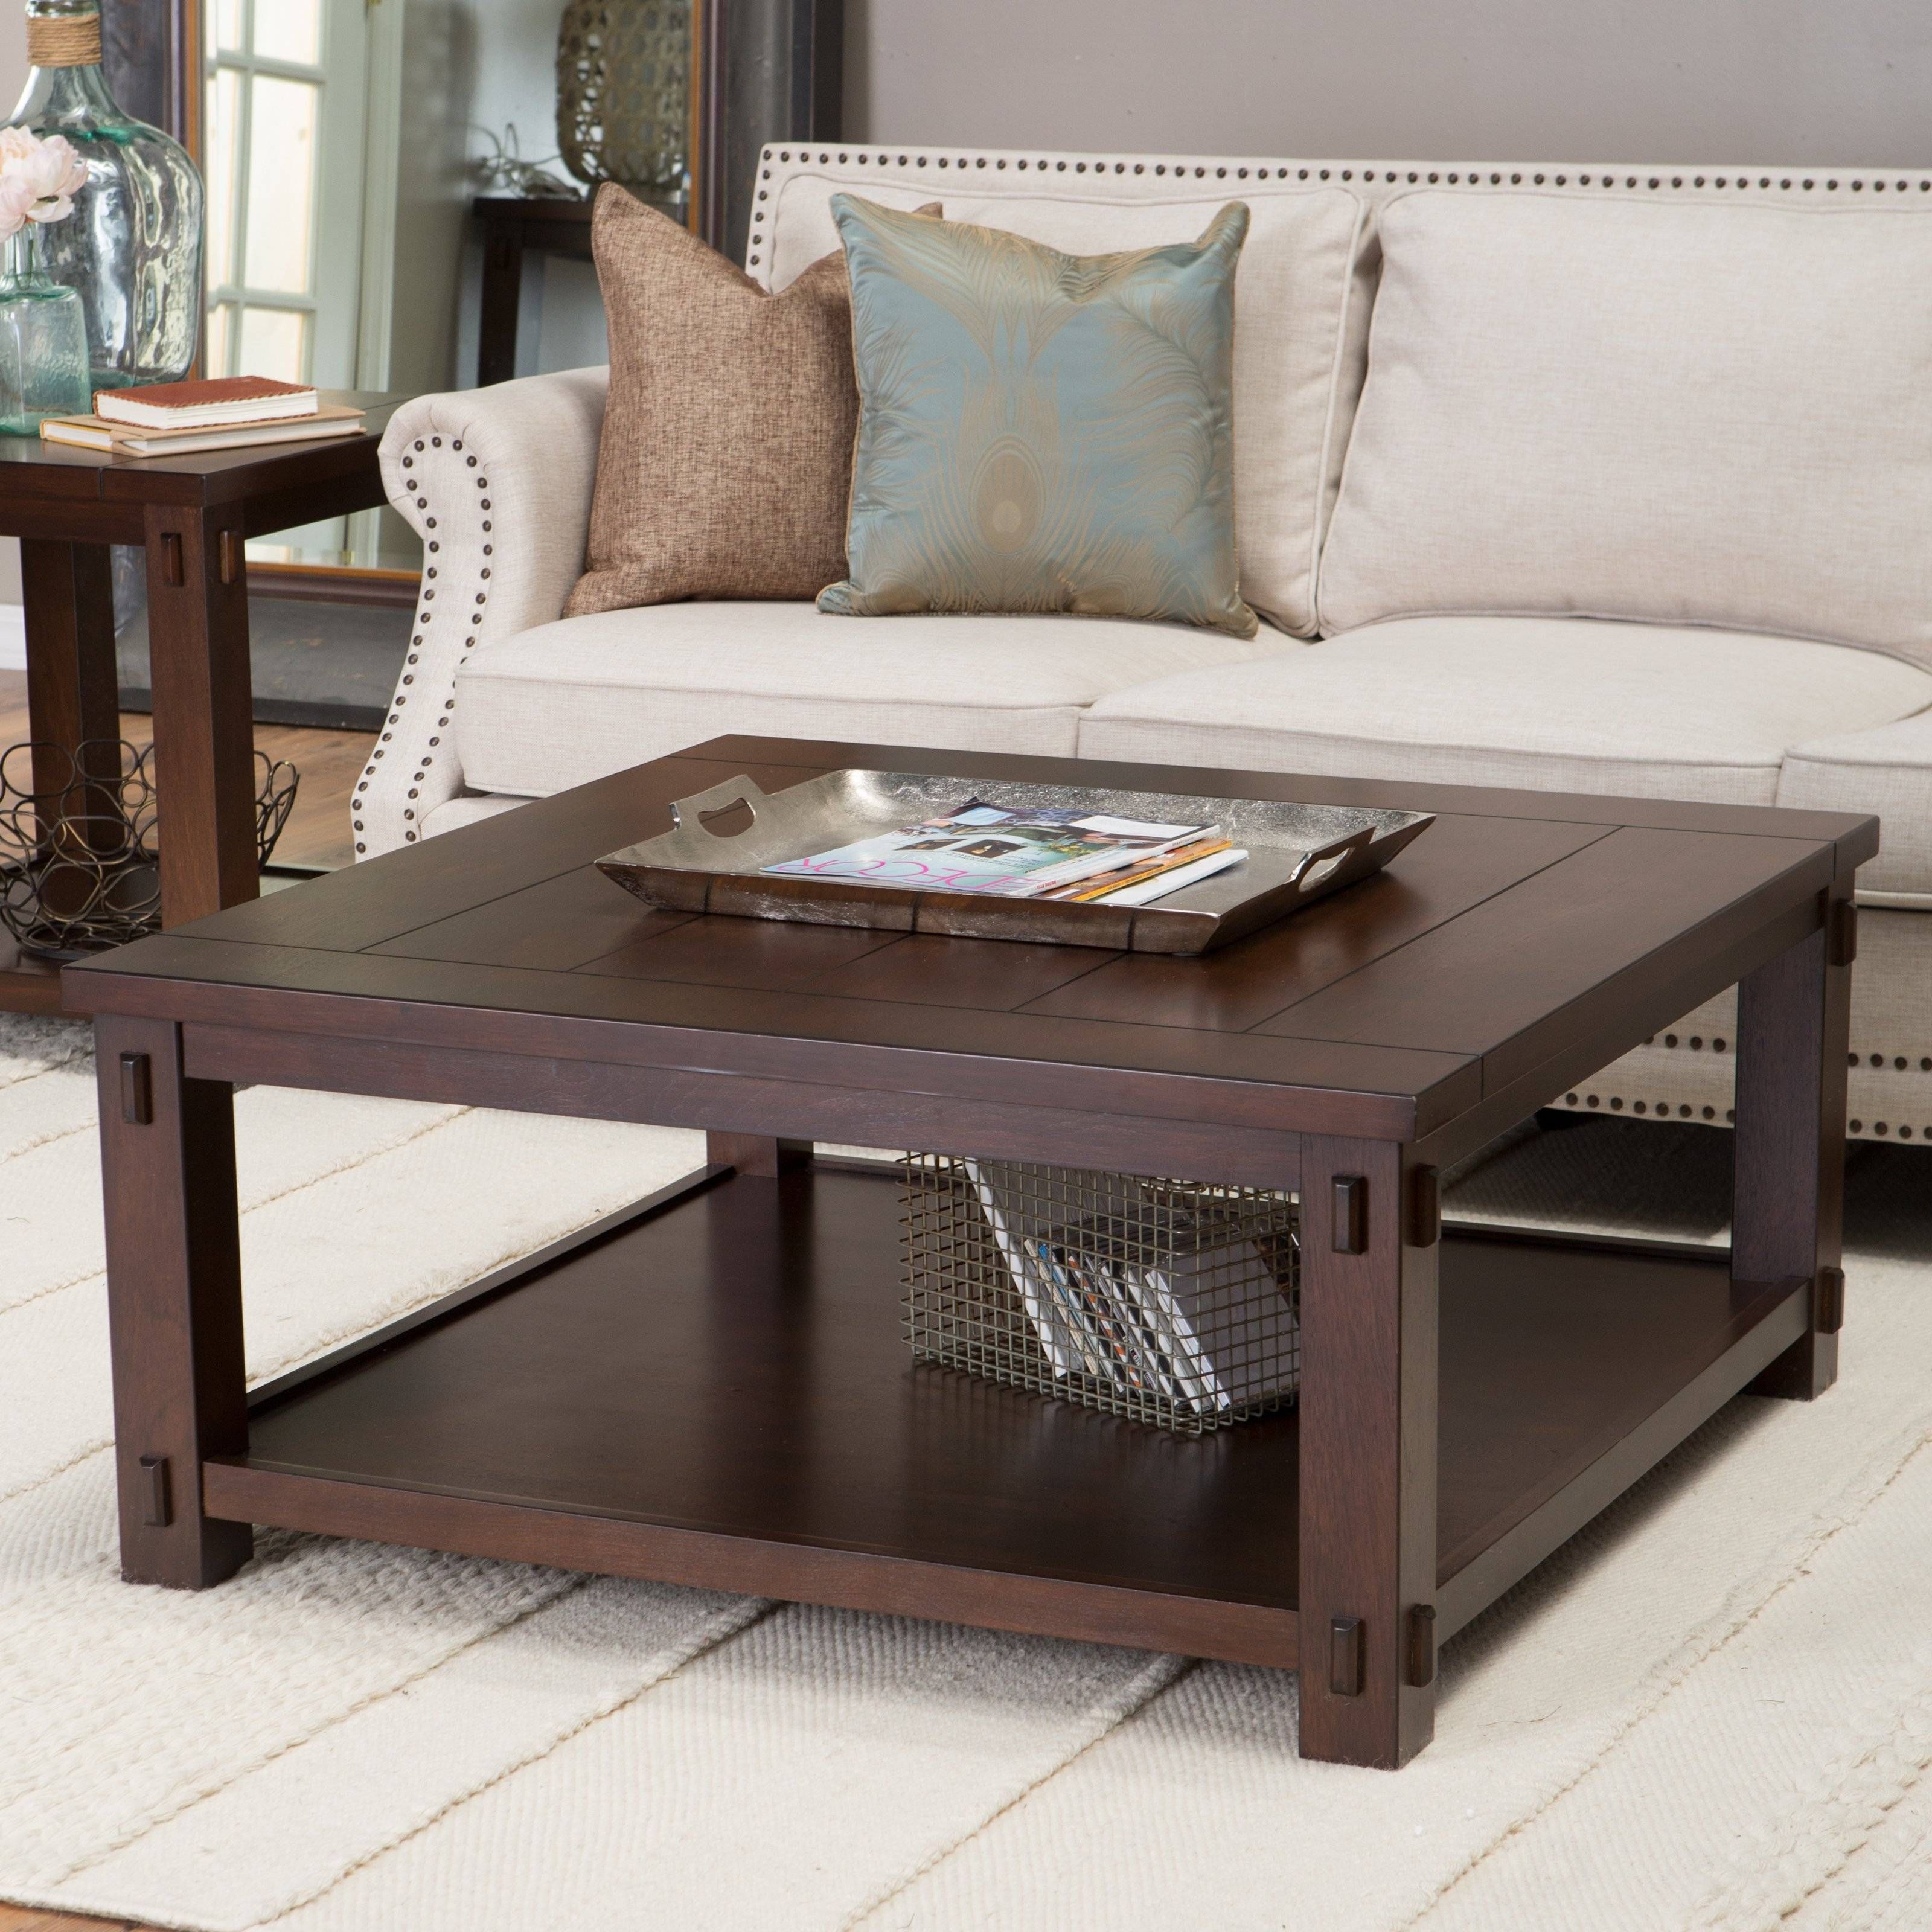 Avorio Faux Travertine Square Coffee Table | Hayneedle In Square Coffee Tables (View 7 of 30)